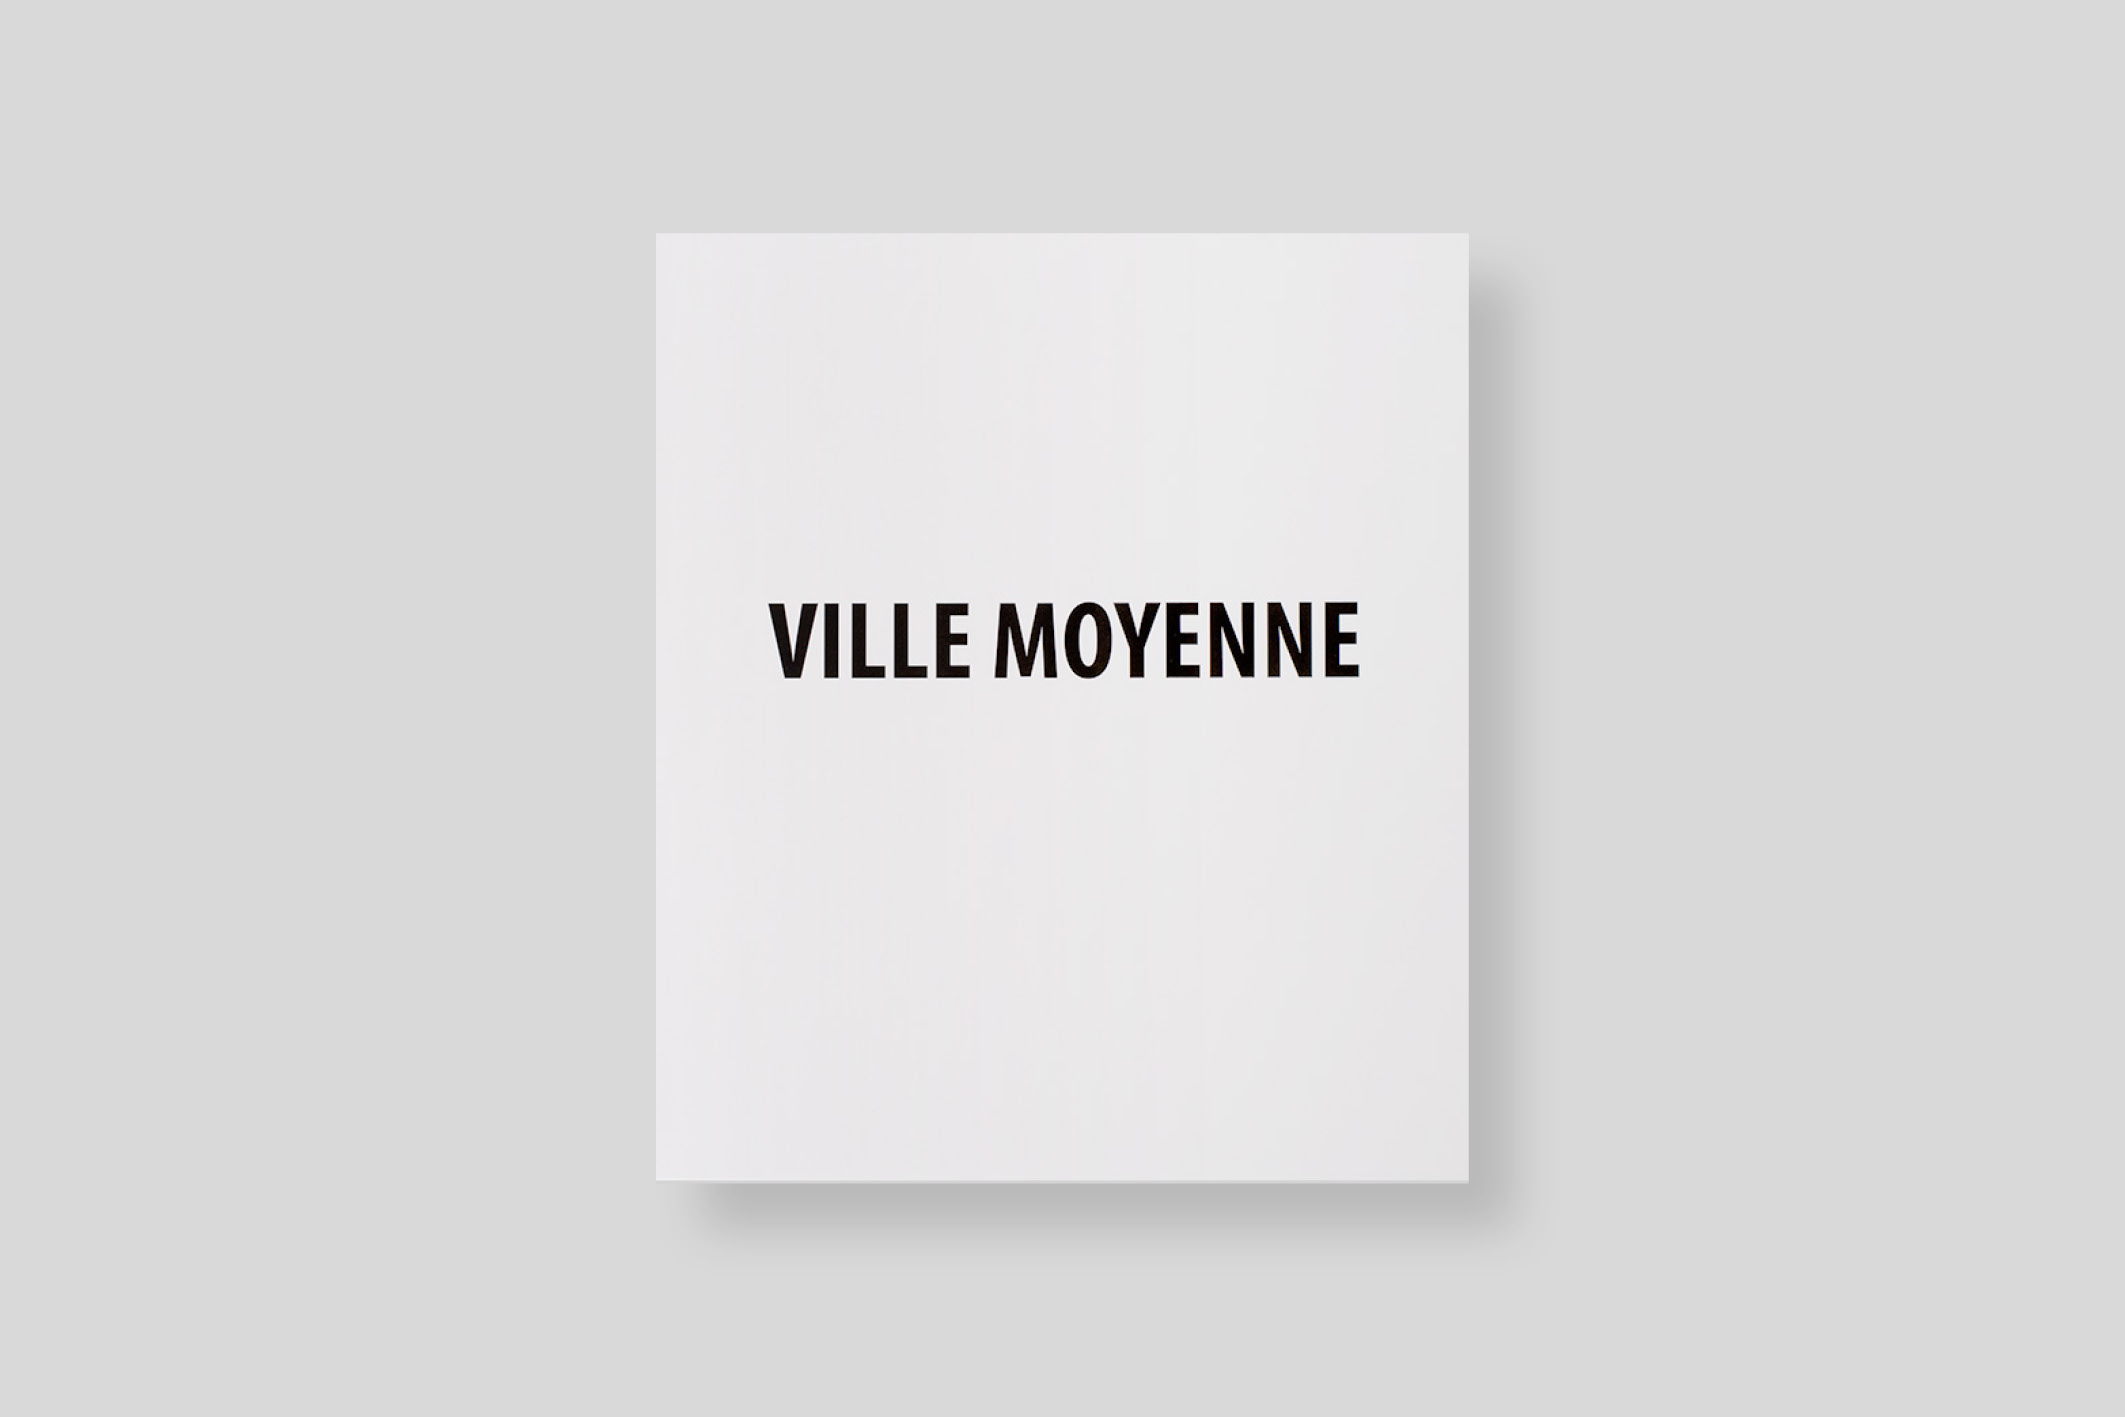 ville-moyenne-prioux-club-histoire-locale-cover